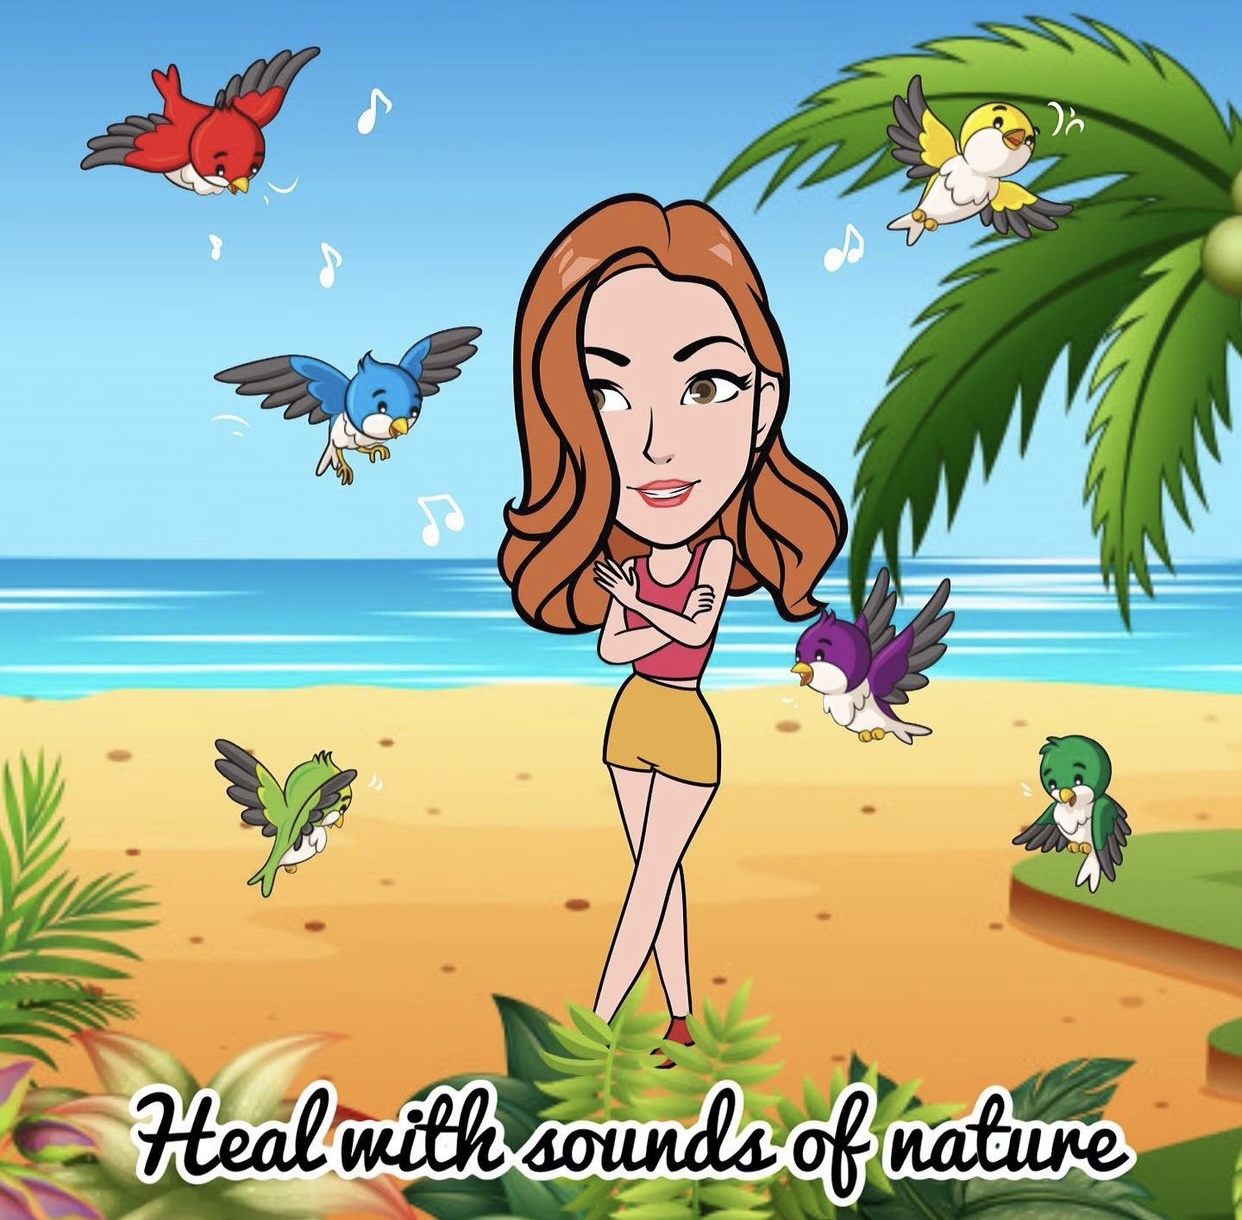 Heal with sounds of nature